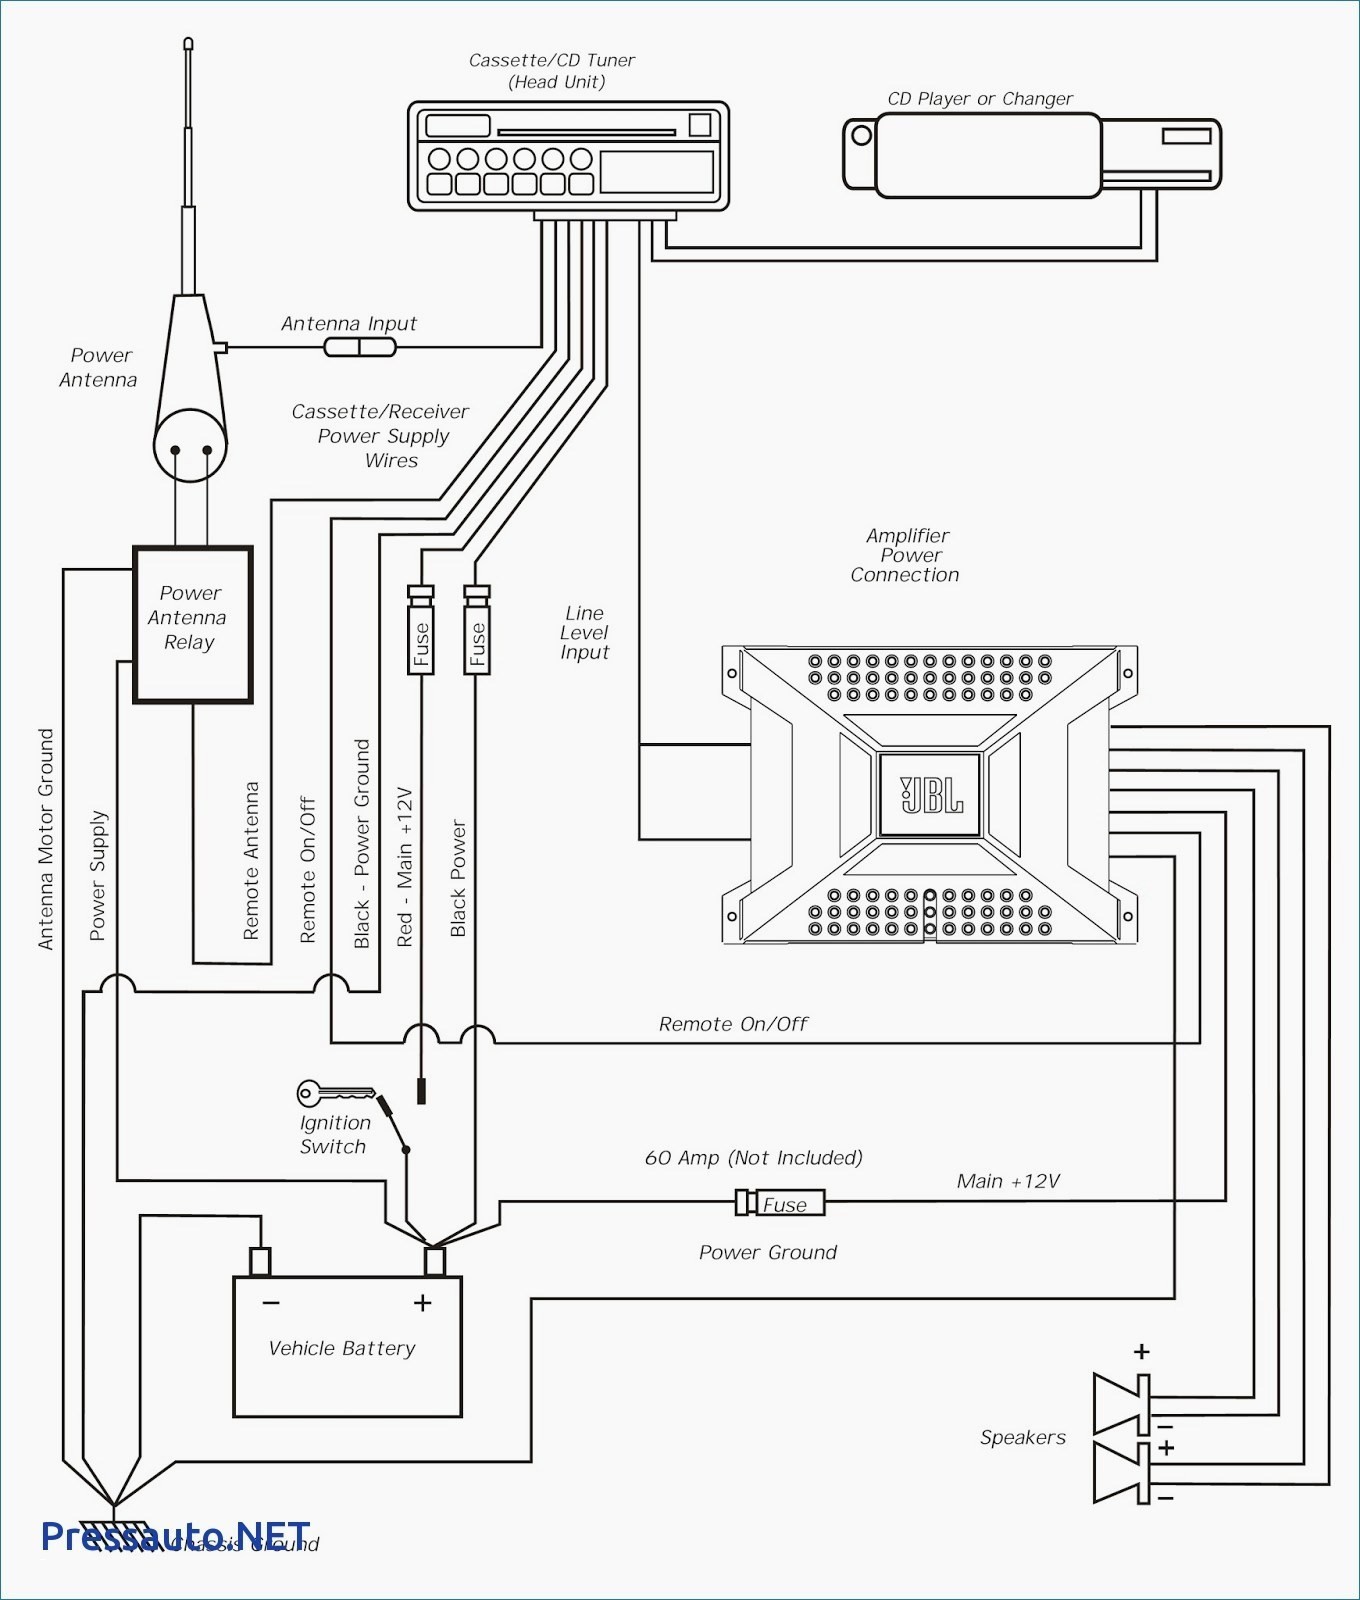 Wiring Diagram for Pioneer Car Stereo Wiring Diagram Head Unit Amp Sub New Pioneer Head Unit Wiring